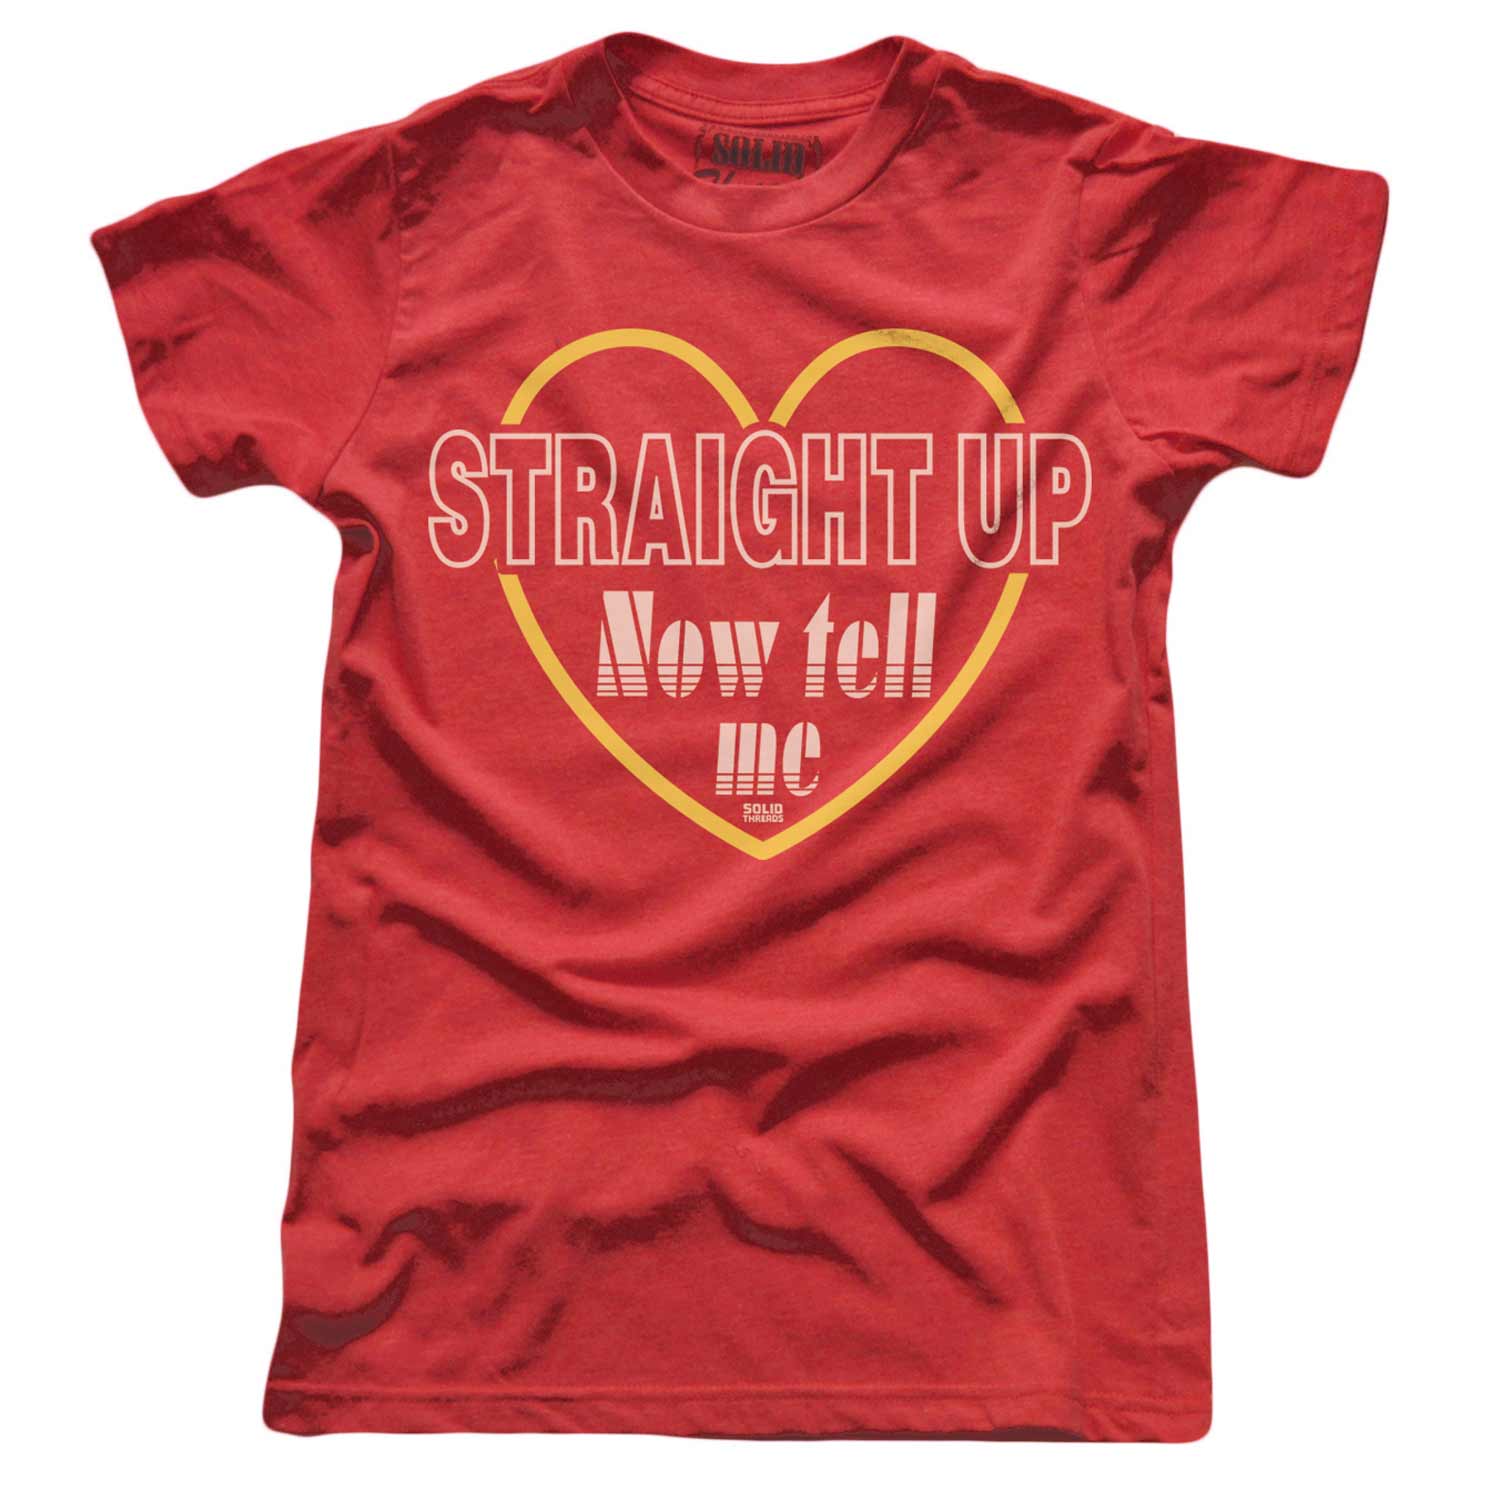 Women's Straight Up Vintage Graphic Tee | Paula Abdul Crop Top T-shirt for Women | Solid Threads